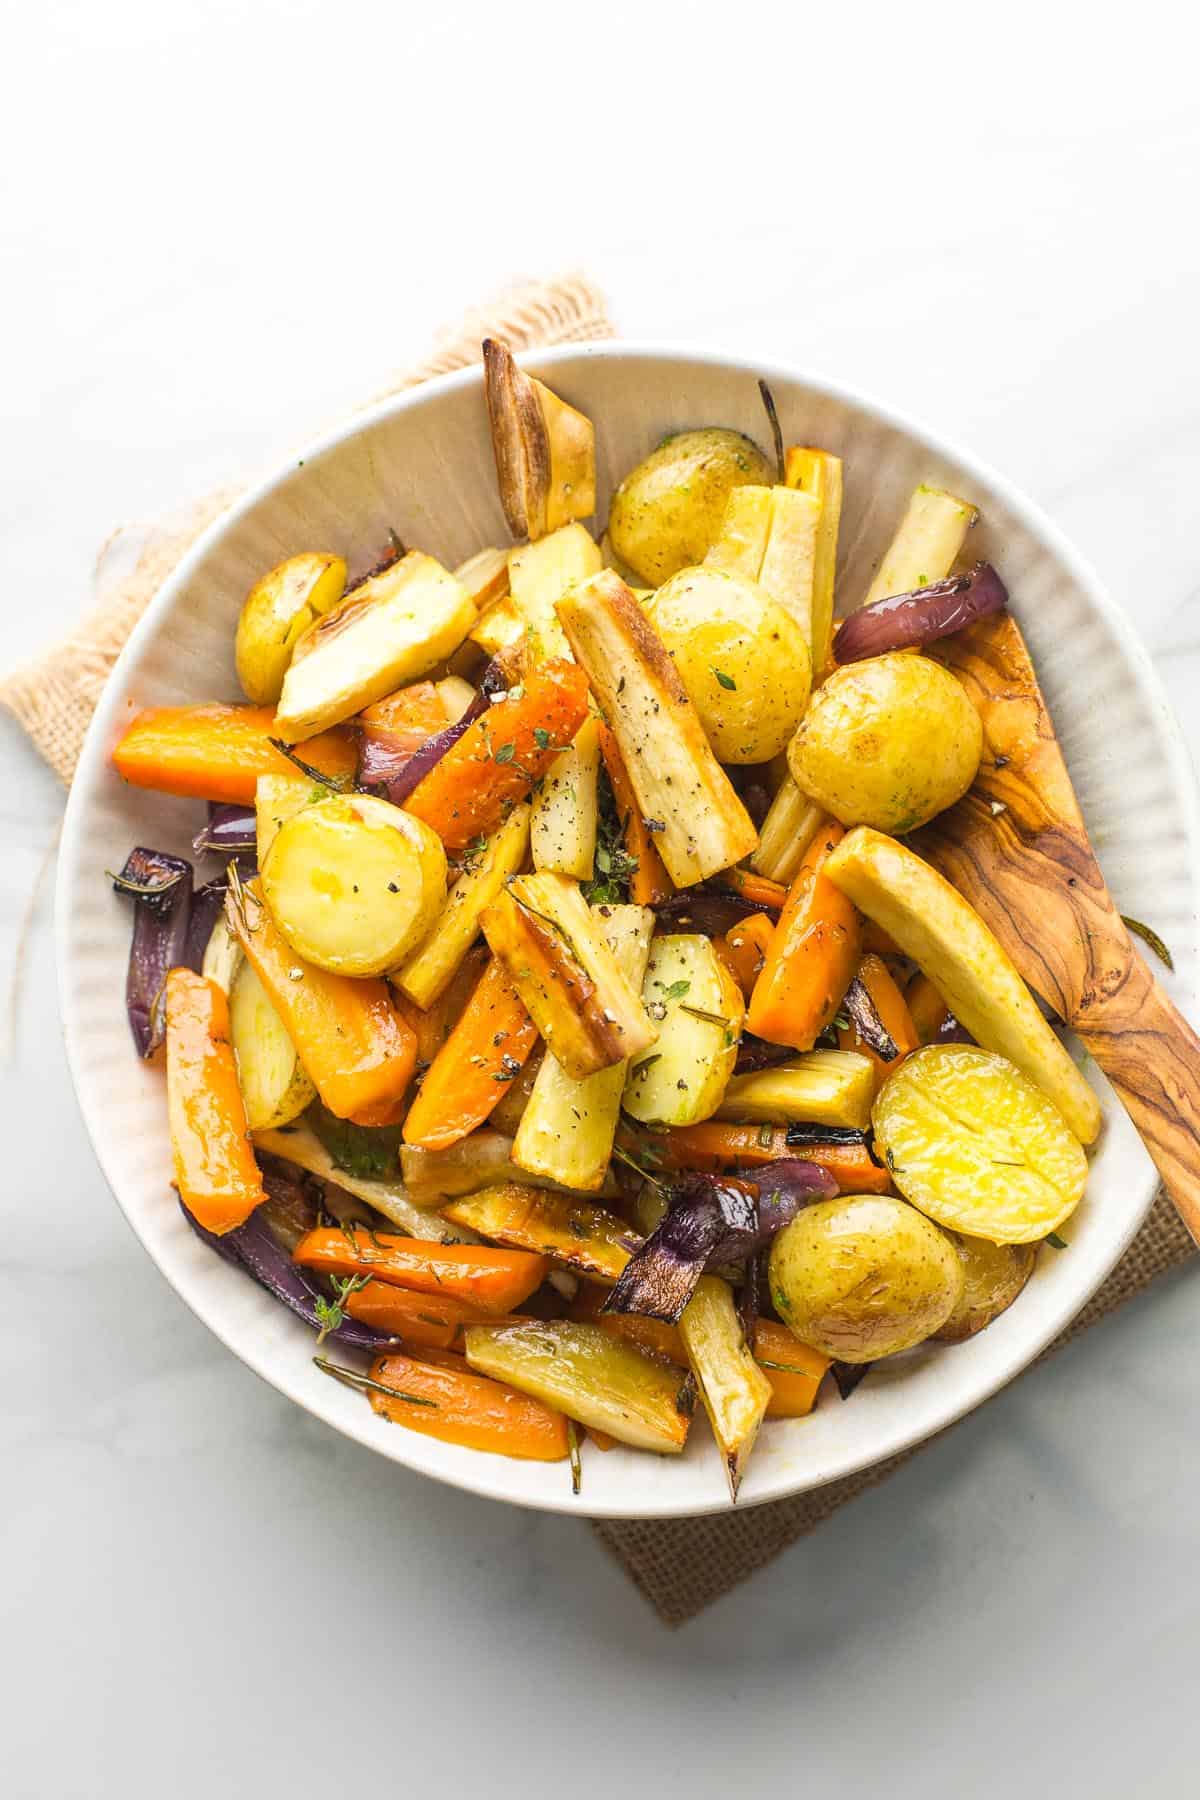 Roasted Root Vegetables with Herb Dressing from https://www.asaucykitchen.com/